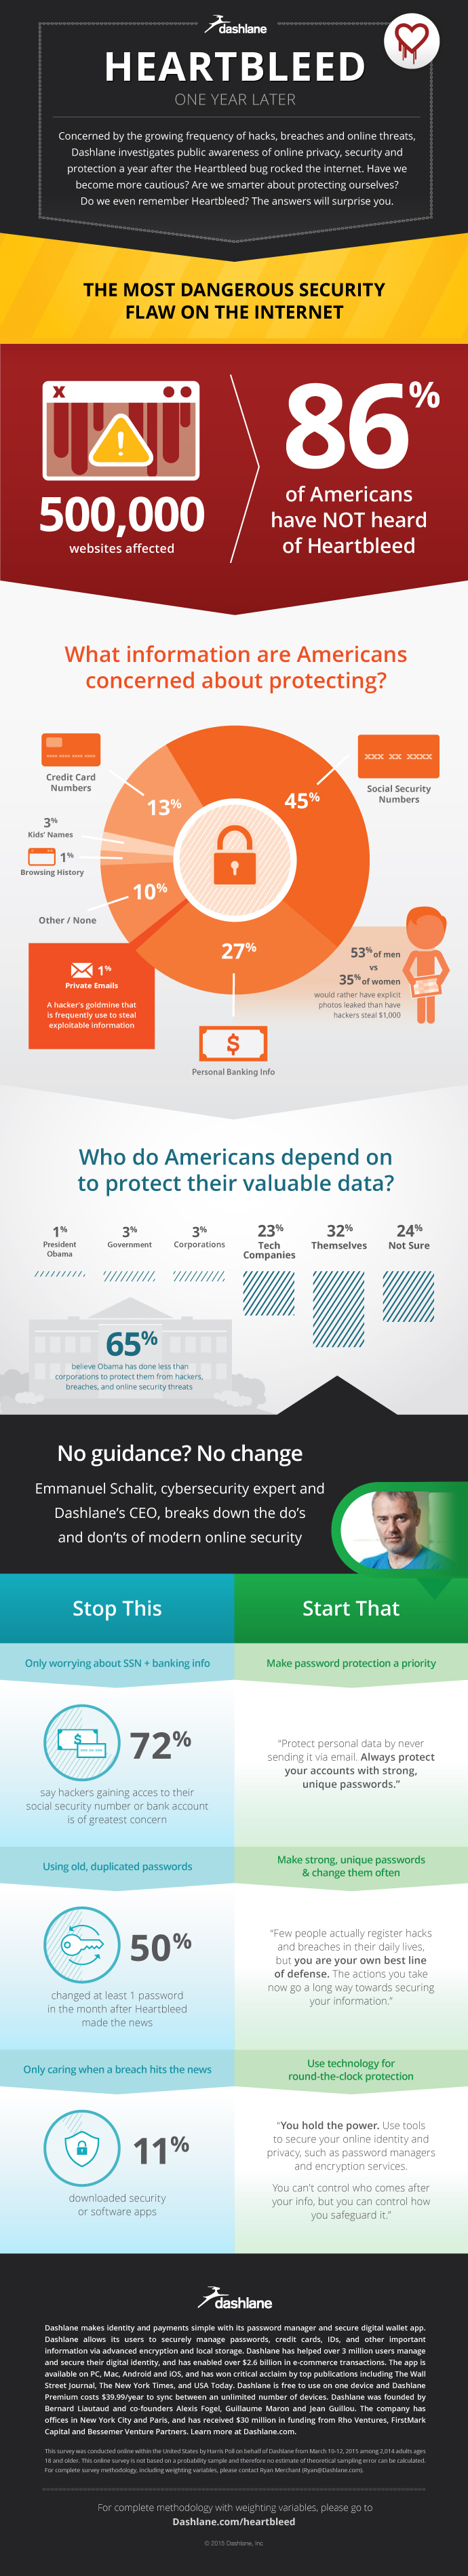 Dashlane Heartbleed One Year Later Infographic